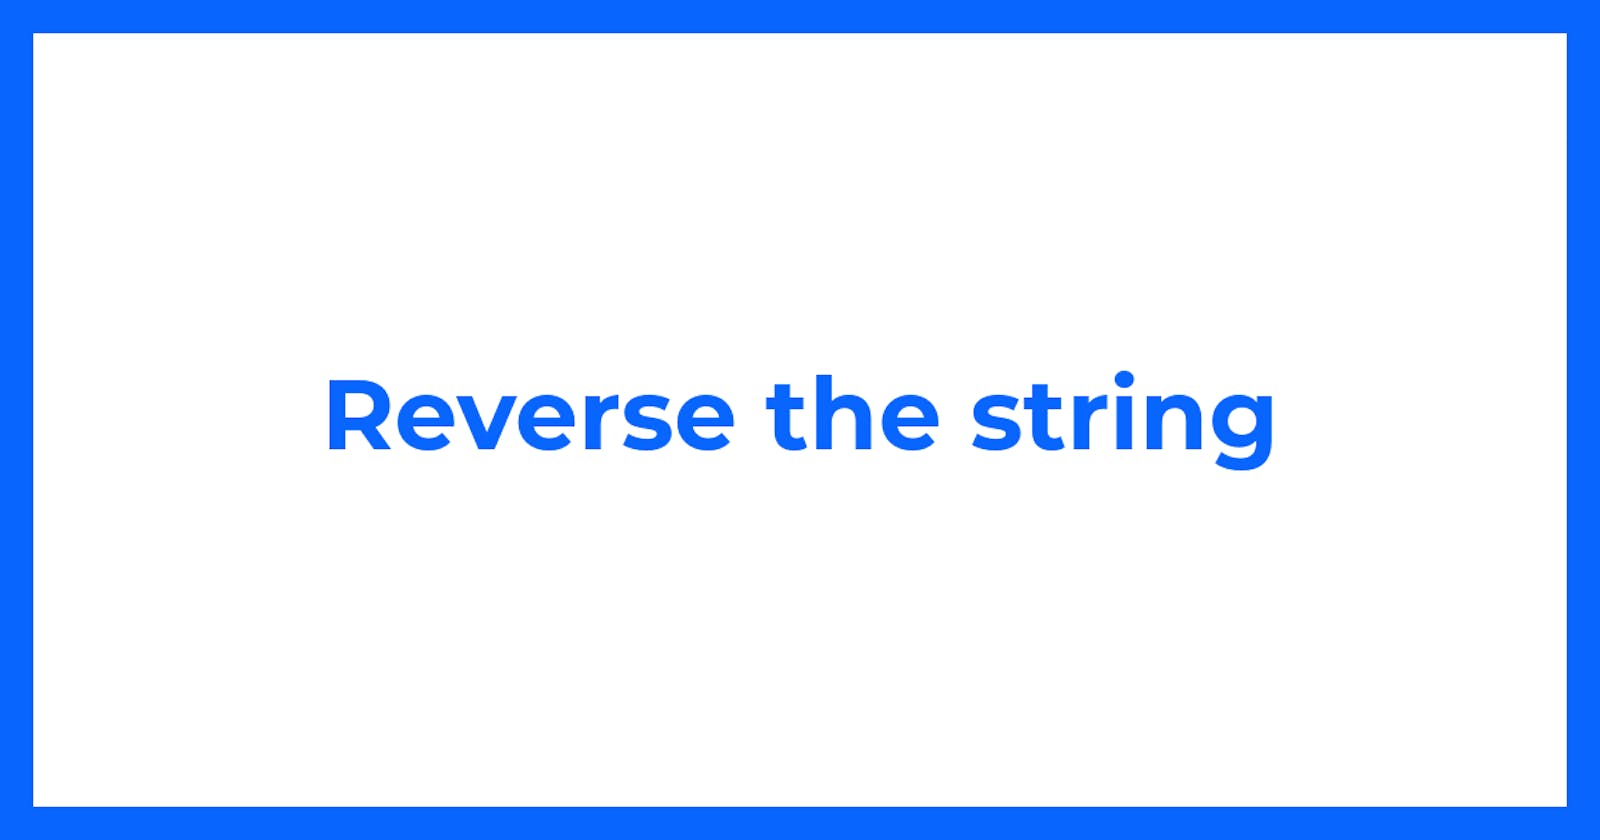 Reverse the string